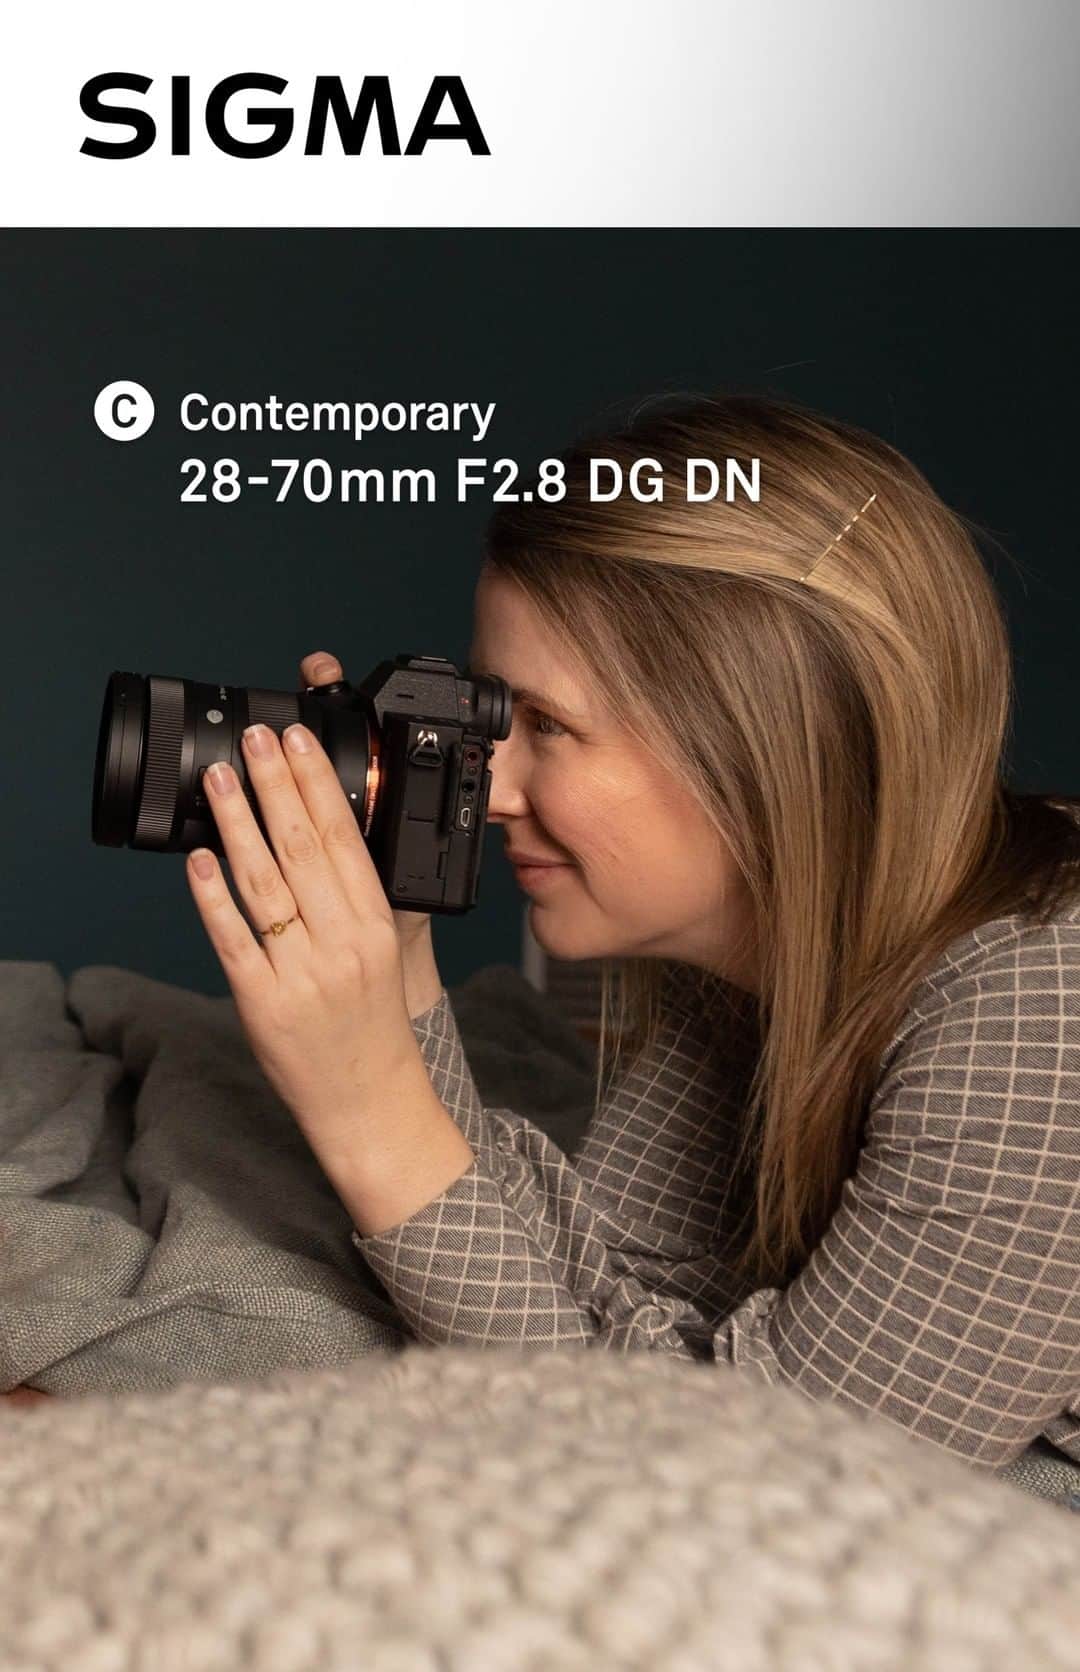 Sigma Corp Of America（シグマ）のインスタグラム：「The SIGMA 28-70mm F2.8 DG DN | Contemporary Lens -- the most compact, lightweight lens in its class -- is here and ready to join you on your photography journey!  Find out how this lens is much more than your typical "standard zoom" with SIGMA Ambassador @meg_nlo.  #SIGMA #sigmaphoto #SIGMA2870mmContemporary #SIGMAContemporary #SIGMADGDN #photography #zoomlens #zoom #Emount #Lmount #mirrorless #fullframe」